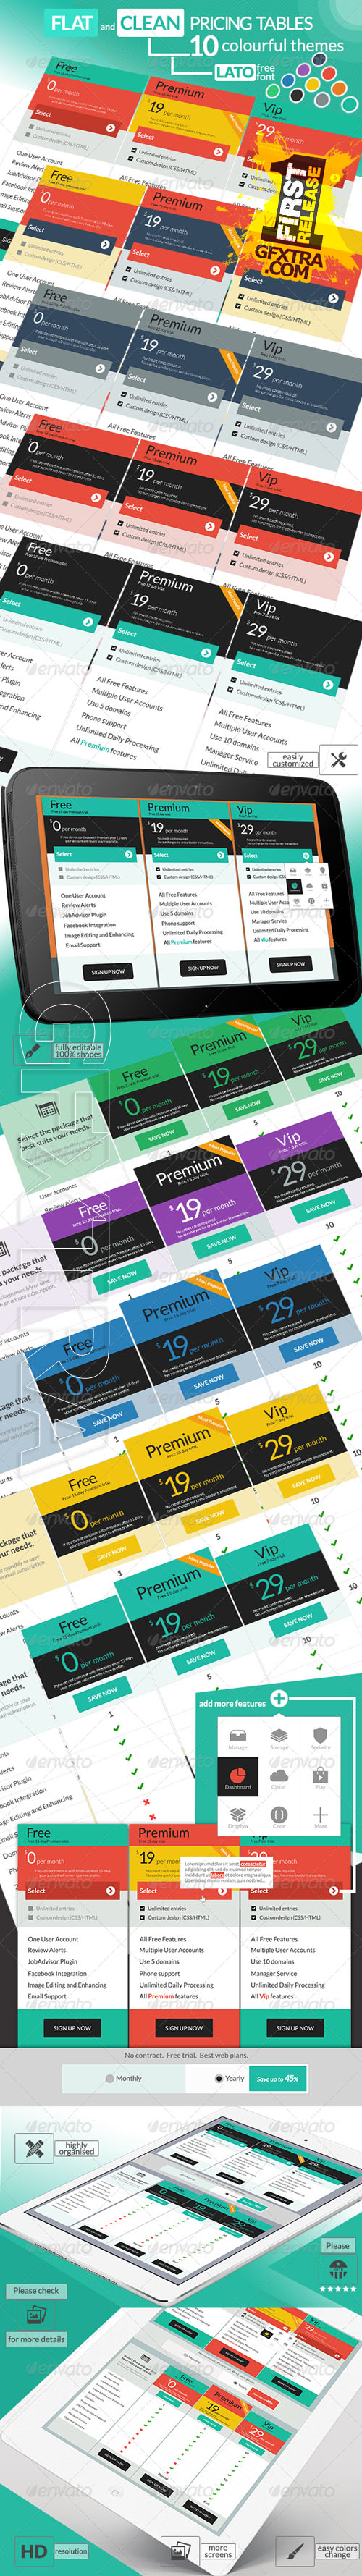 GraphicRiver - Flat and Clean Pricing Tables 